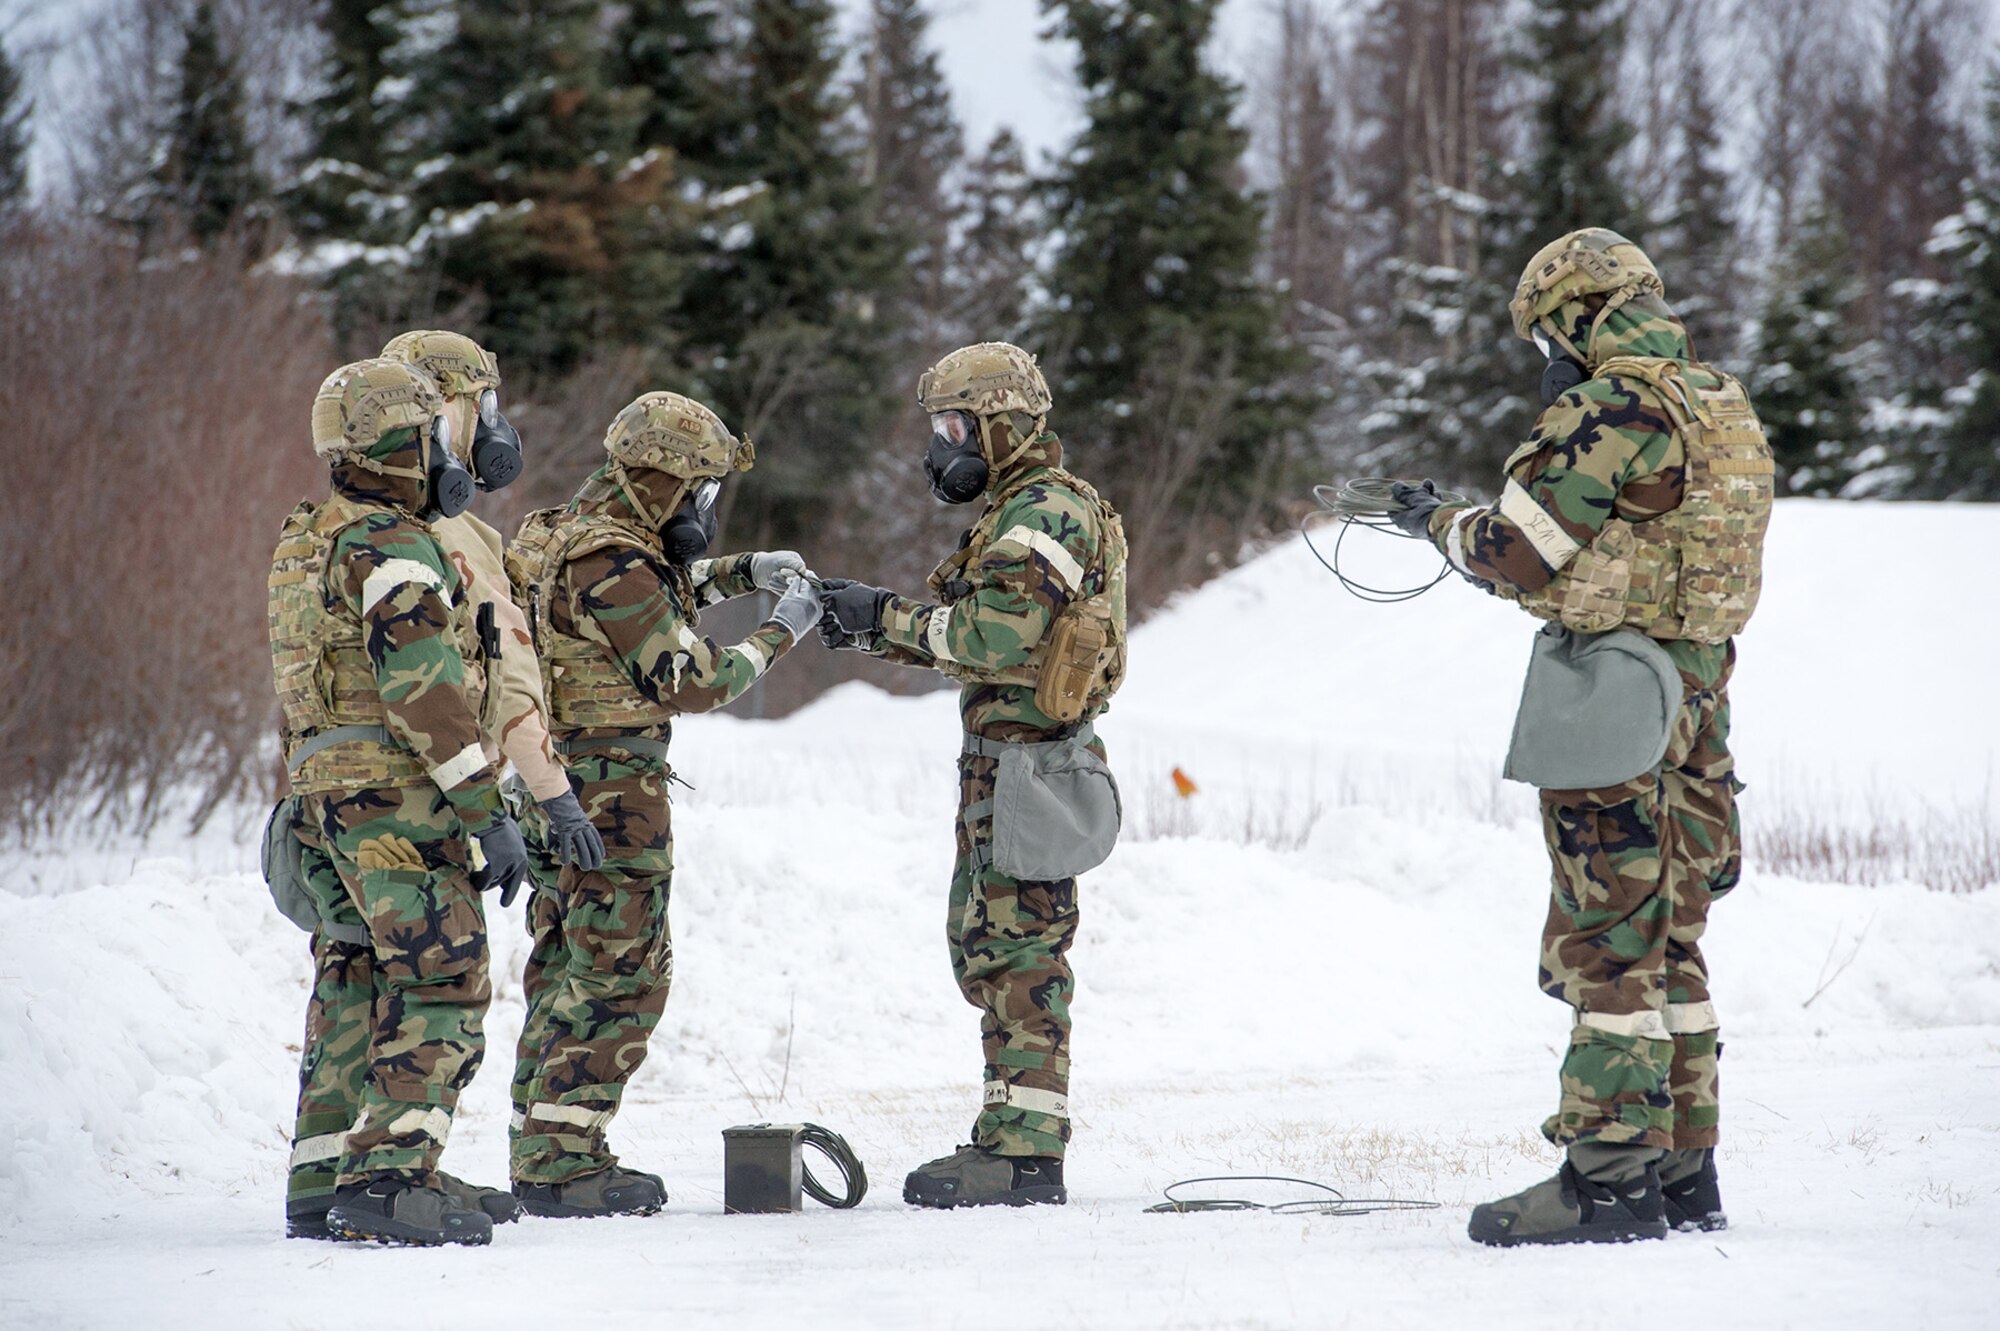 Airmen assigned to the 673d Civil Engineer Squadron, Explosives Ordinance Disposal Flight, prepare for a live-fire demolitions exercise in Mission Oriented Protective Posture 4 on Joint Base Elmendorf-Richardson, Alaska, Feb.14, 2018.  The Airmen were conducting EOD training in a simulated chemical weapons contaminated environment.